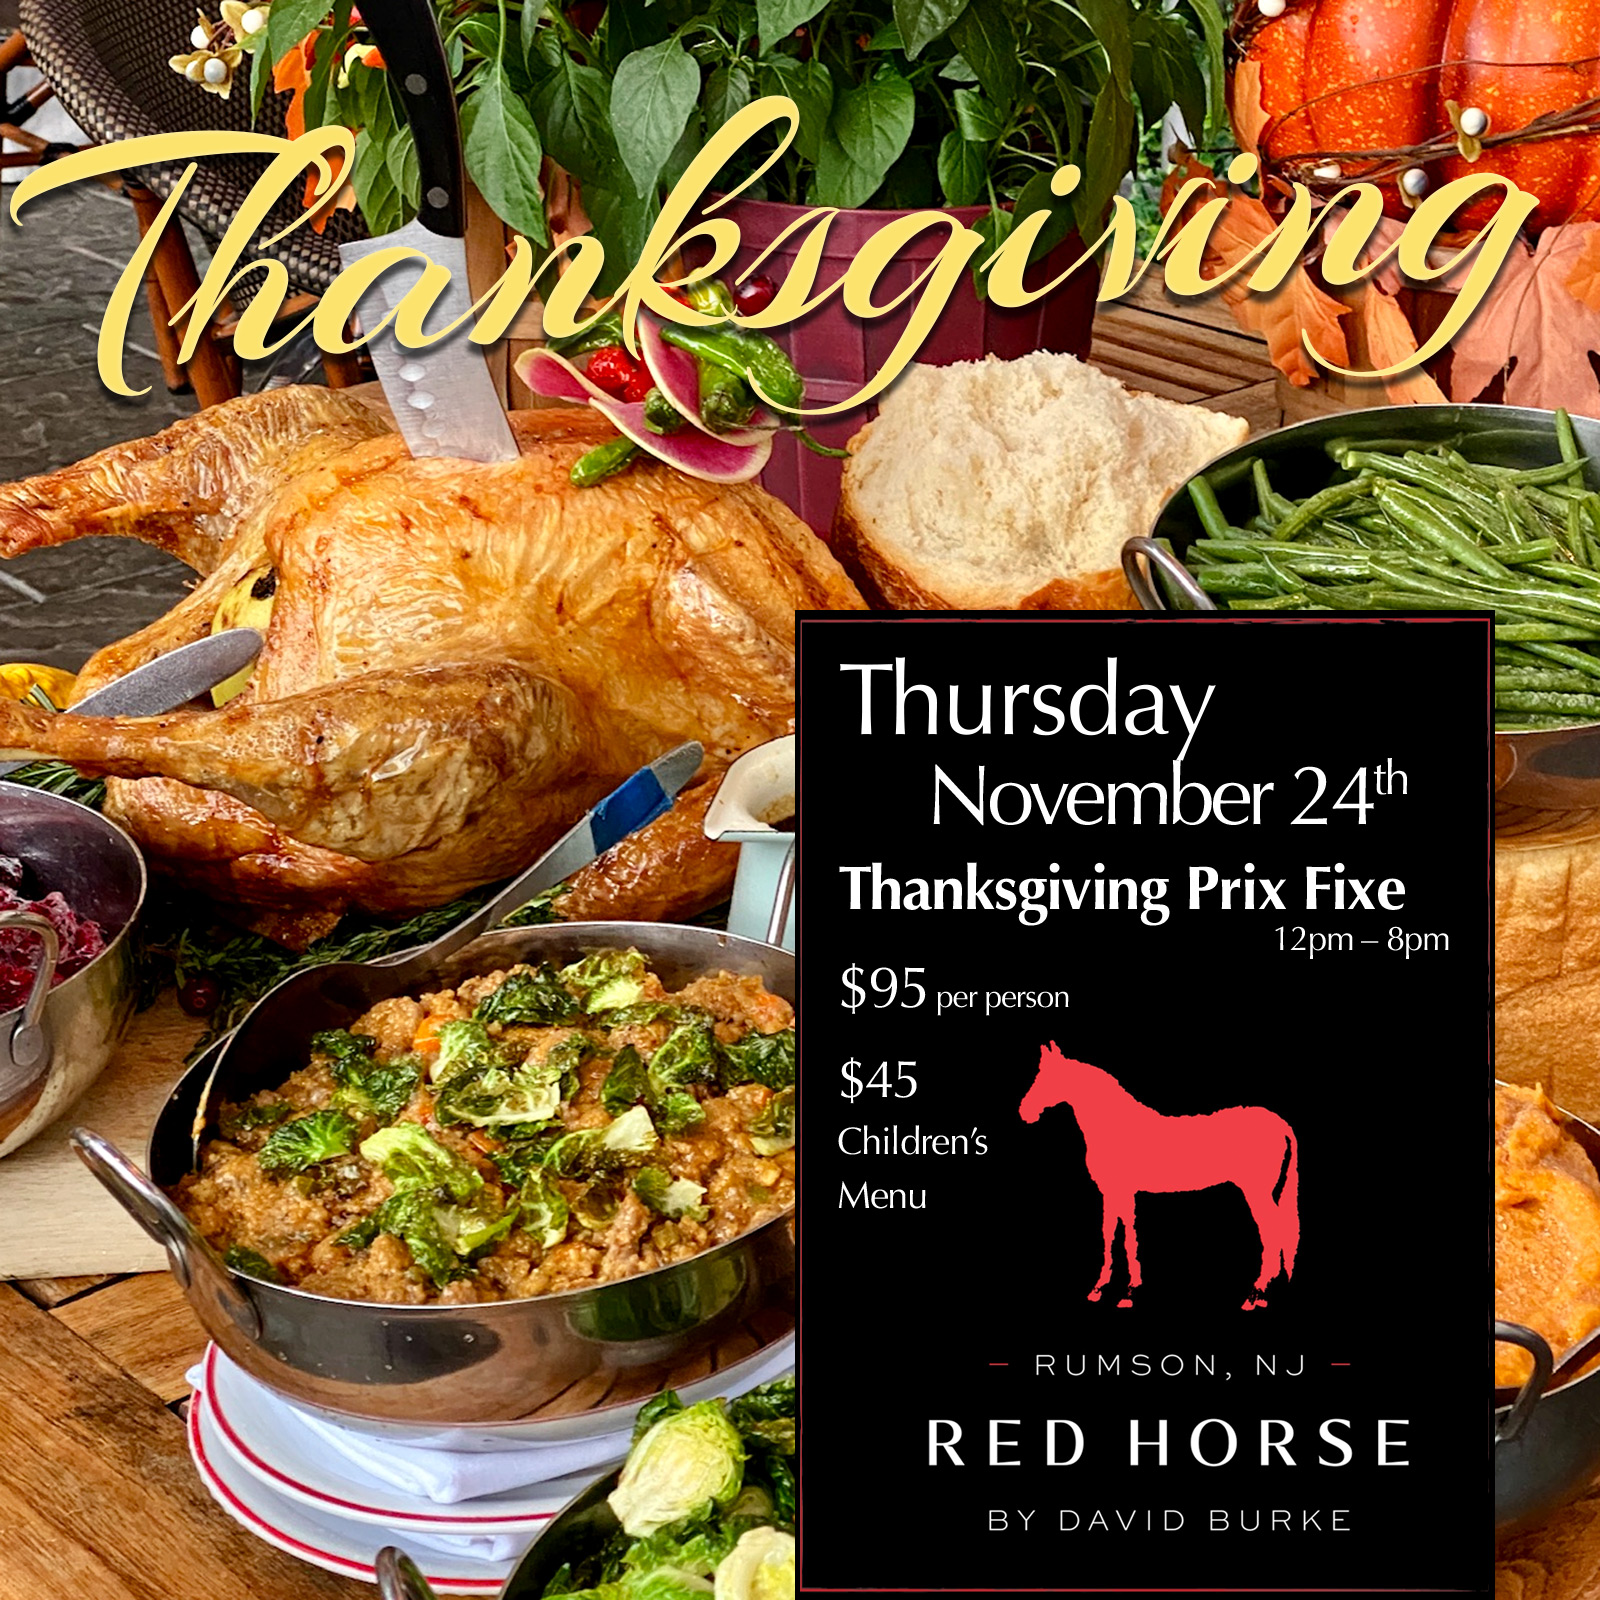 Thanksgiving at Red Horse